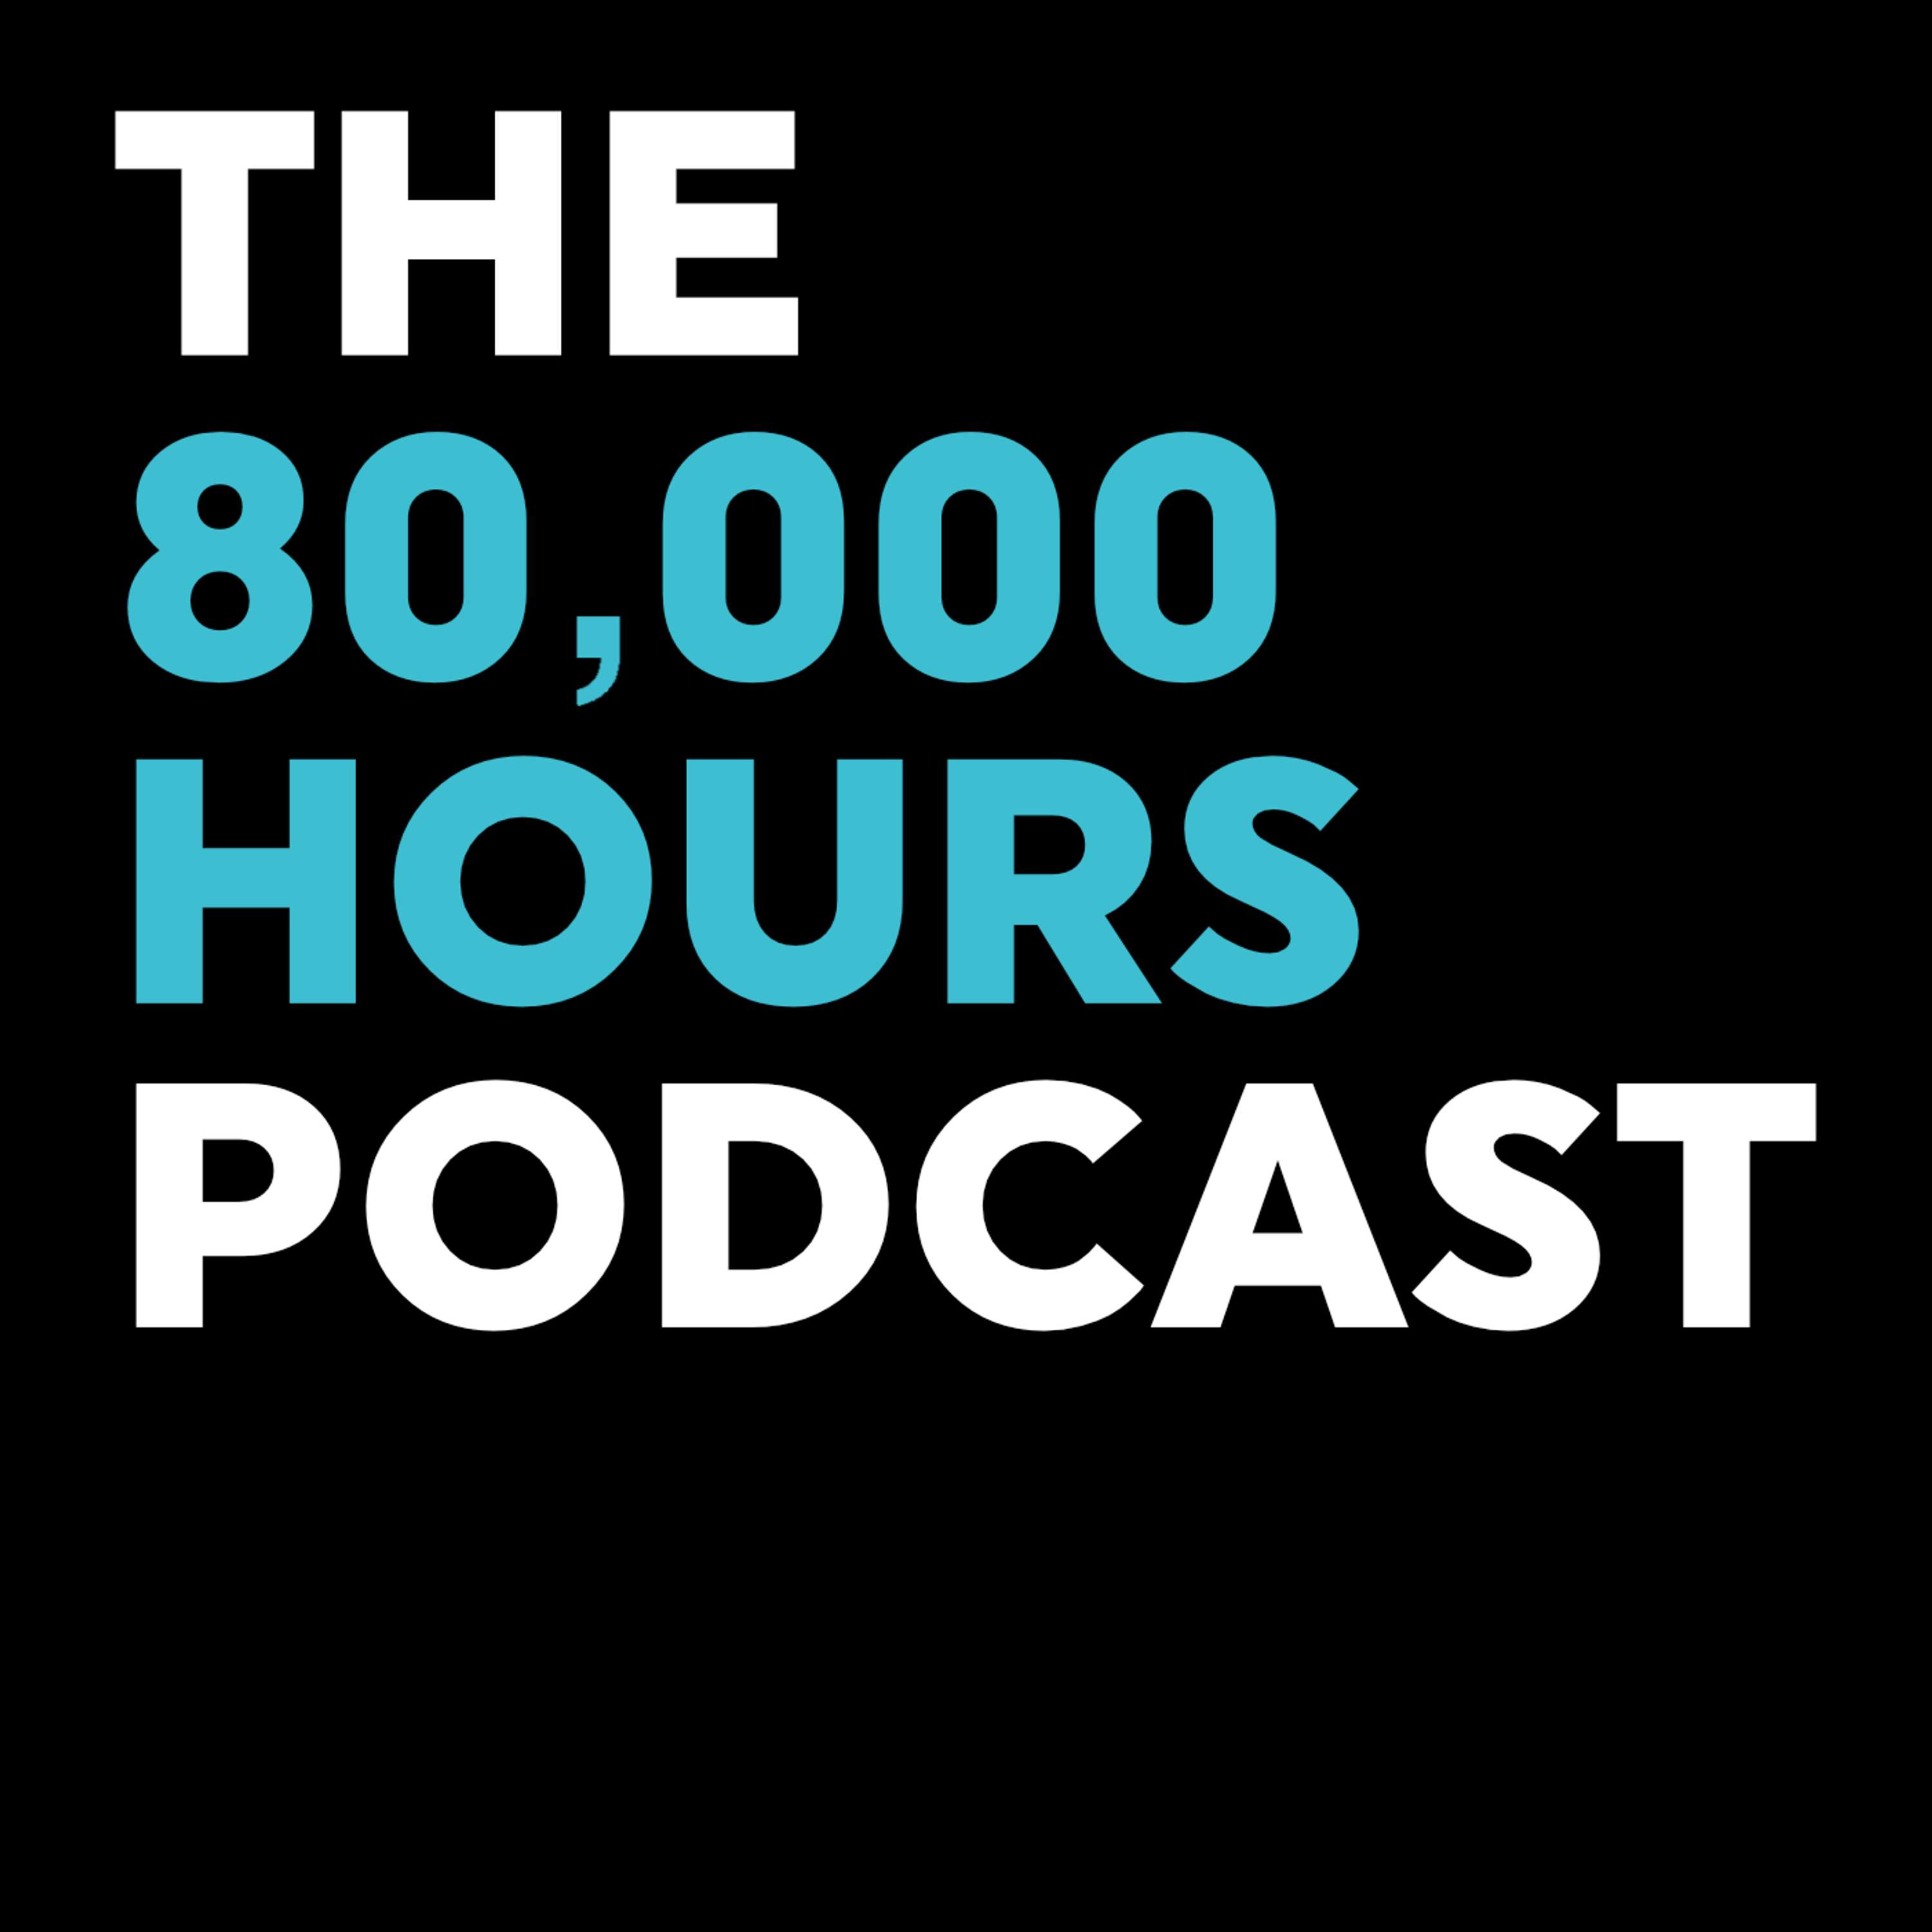 80,000 Hours Podcast Image